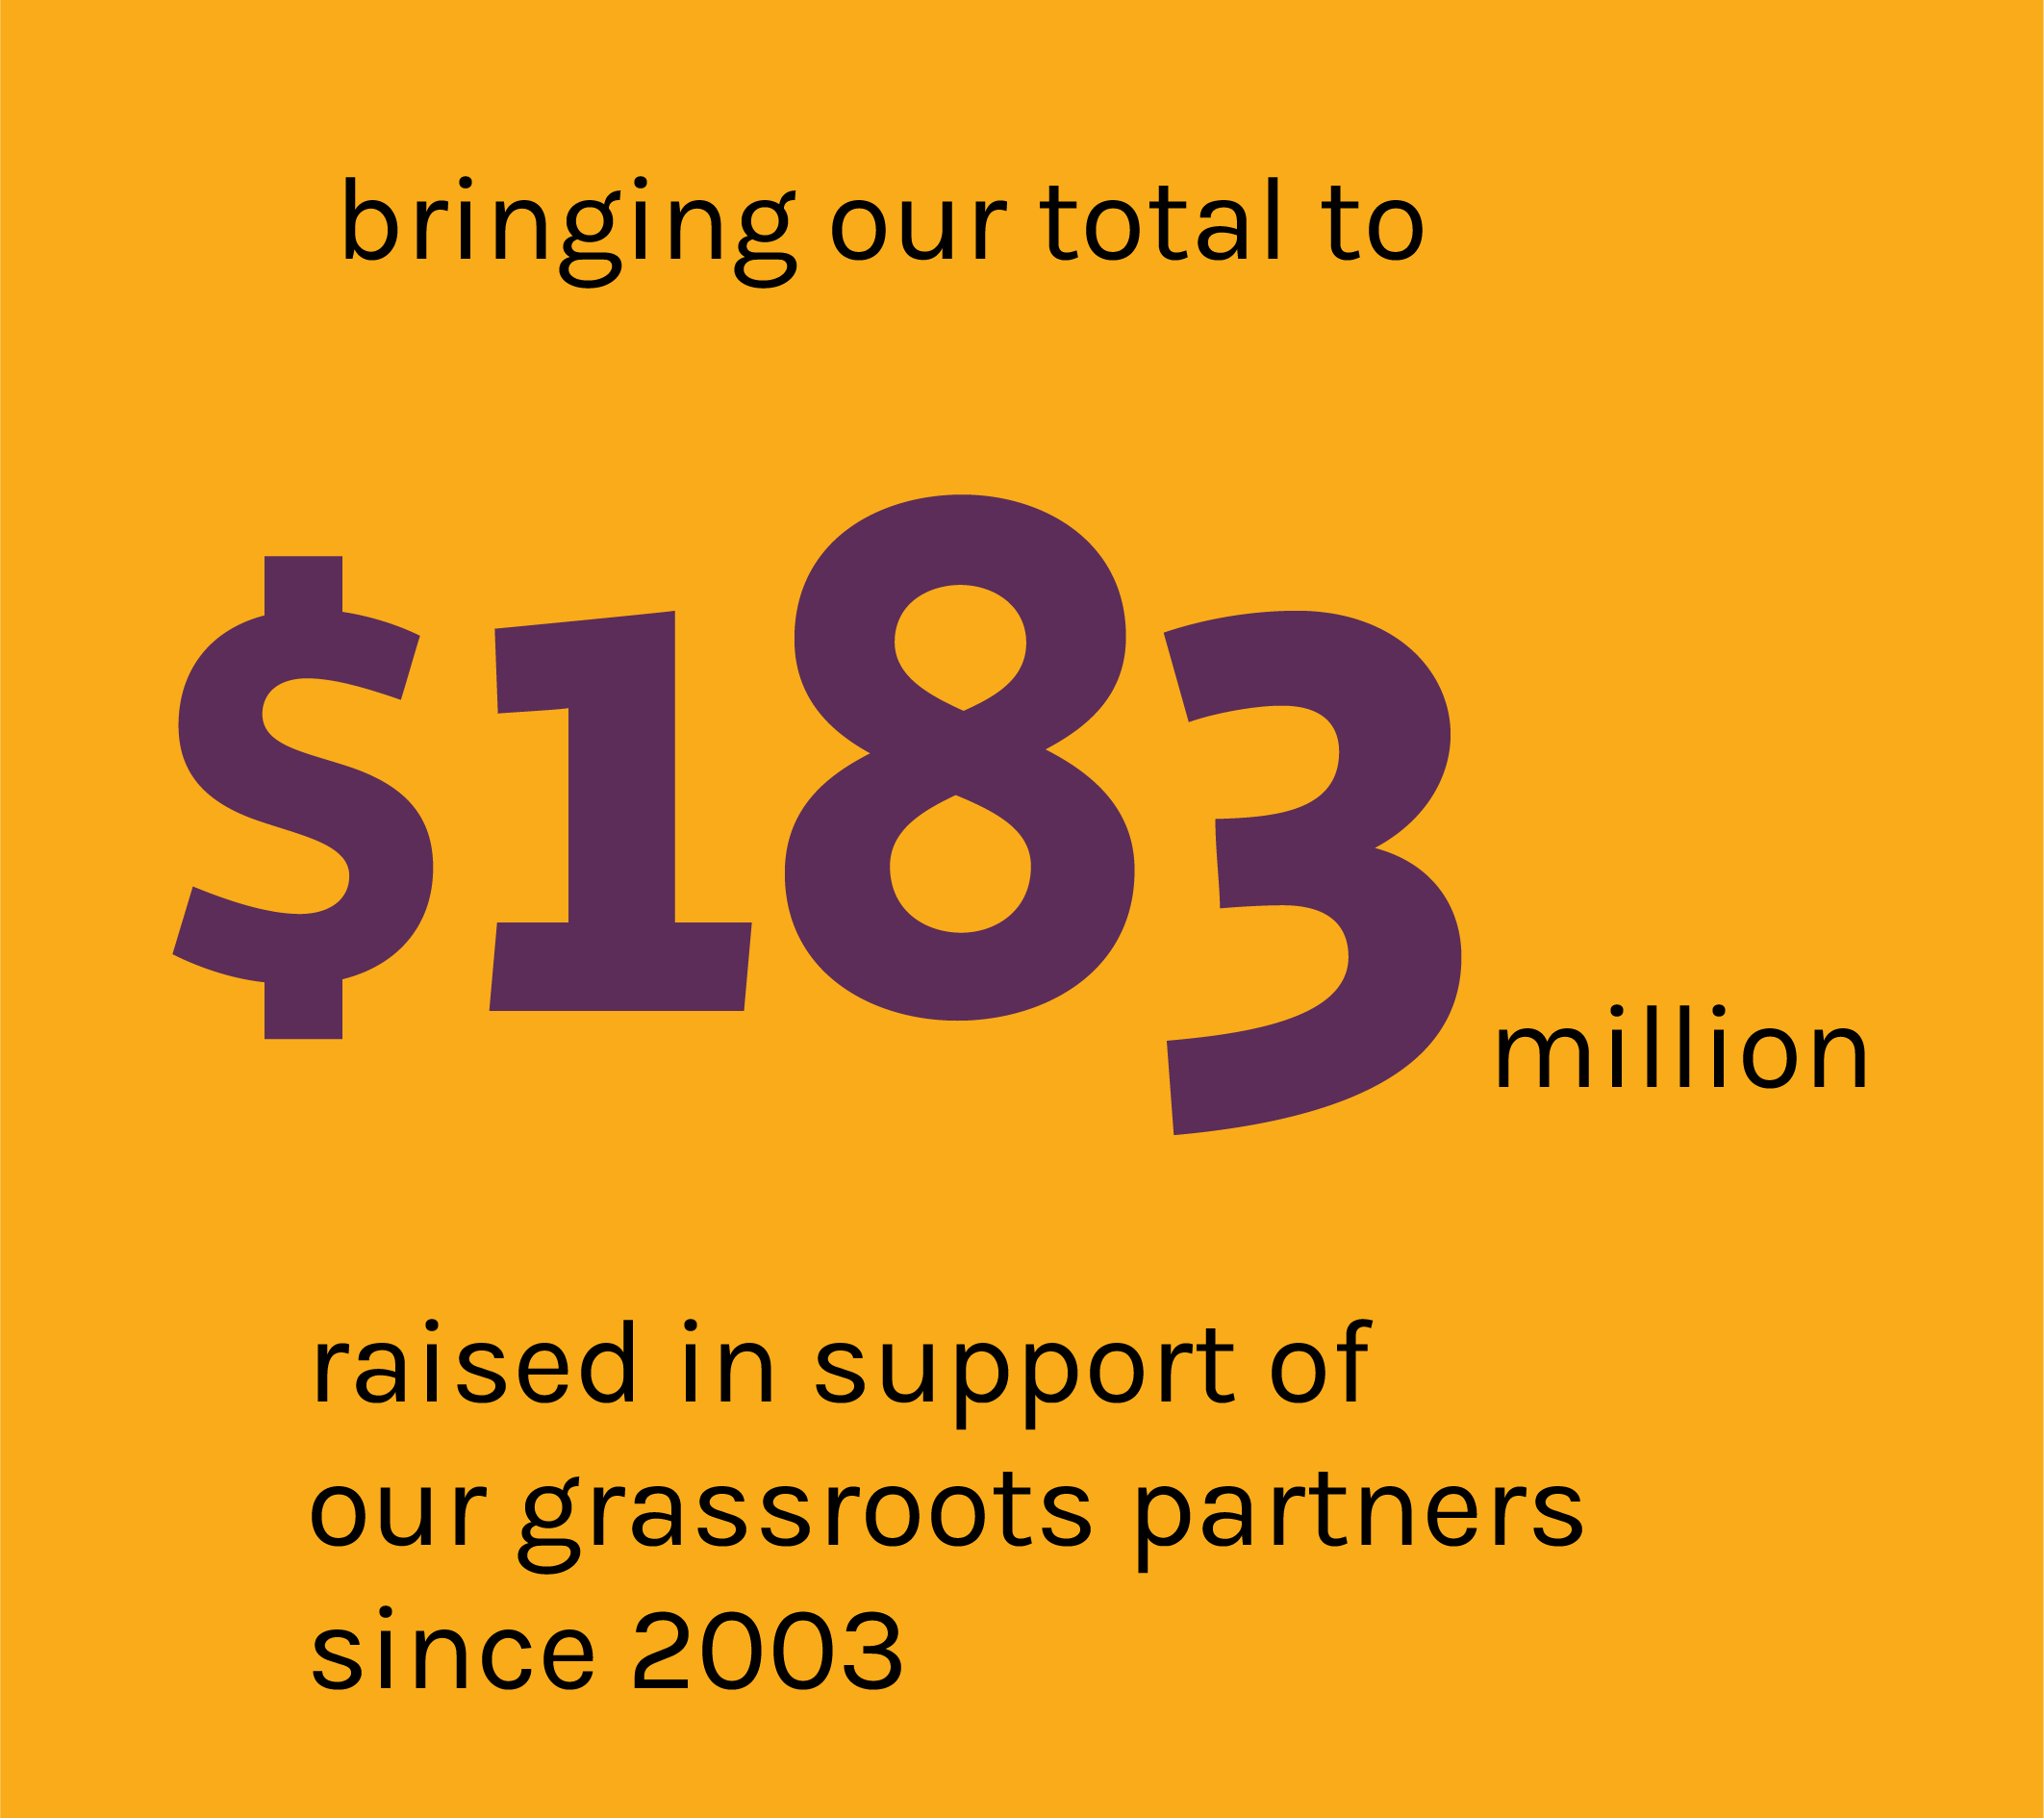 Bringing our total to $183 million raised in support of our grassroots partners since 2003